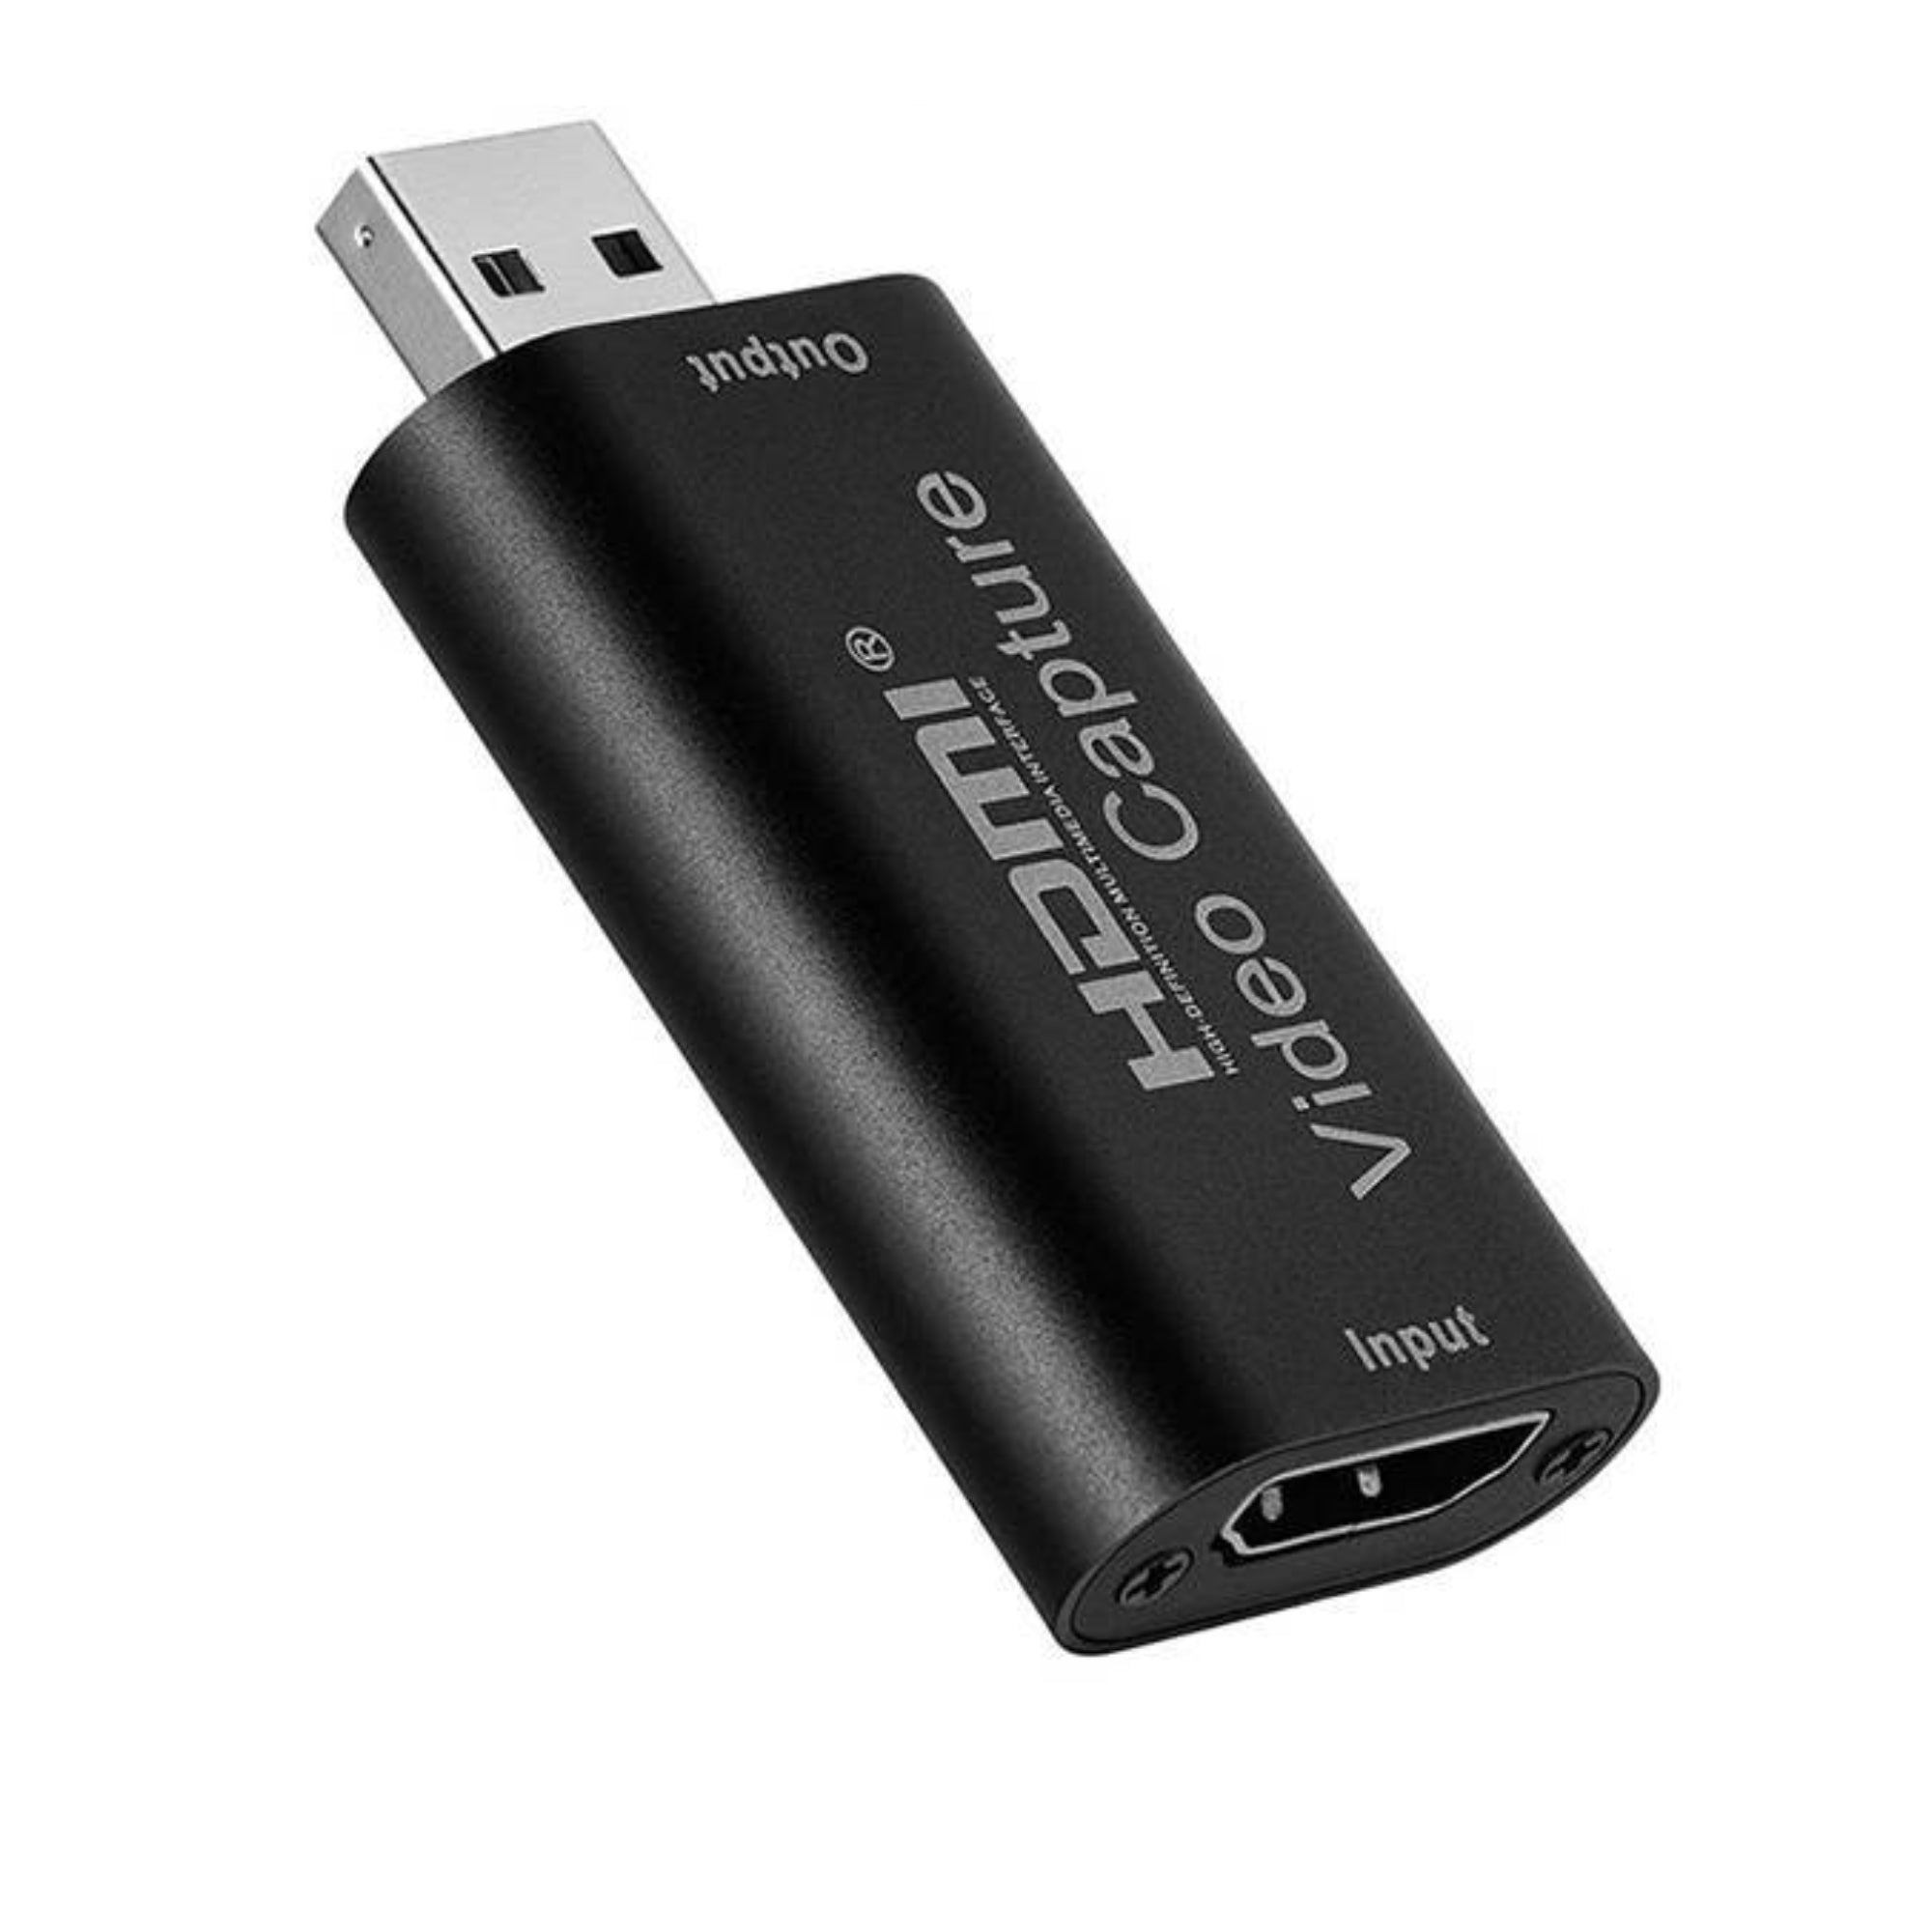 HDMI to USB Capture Device